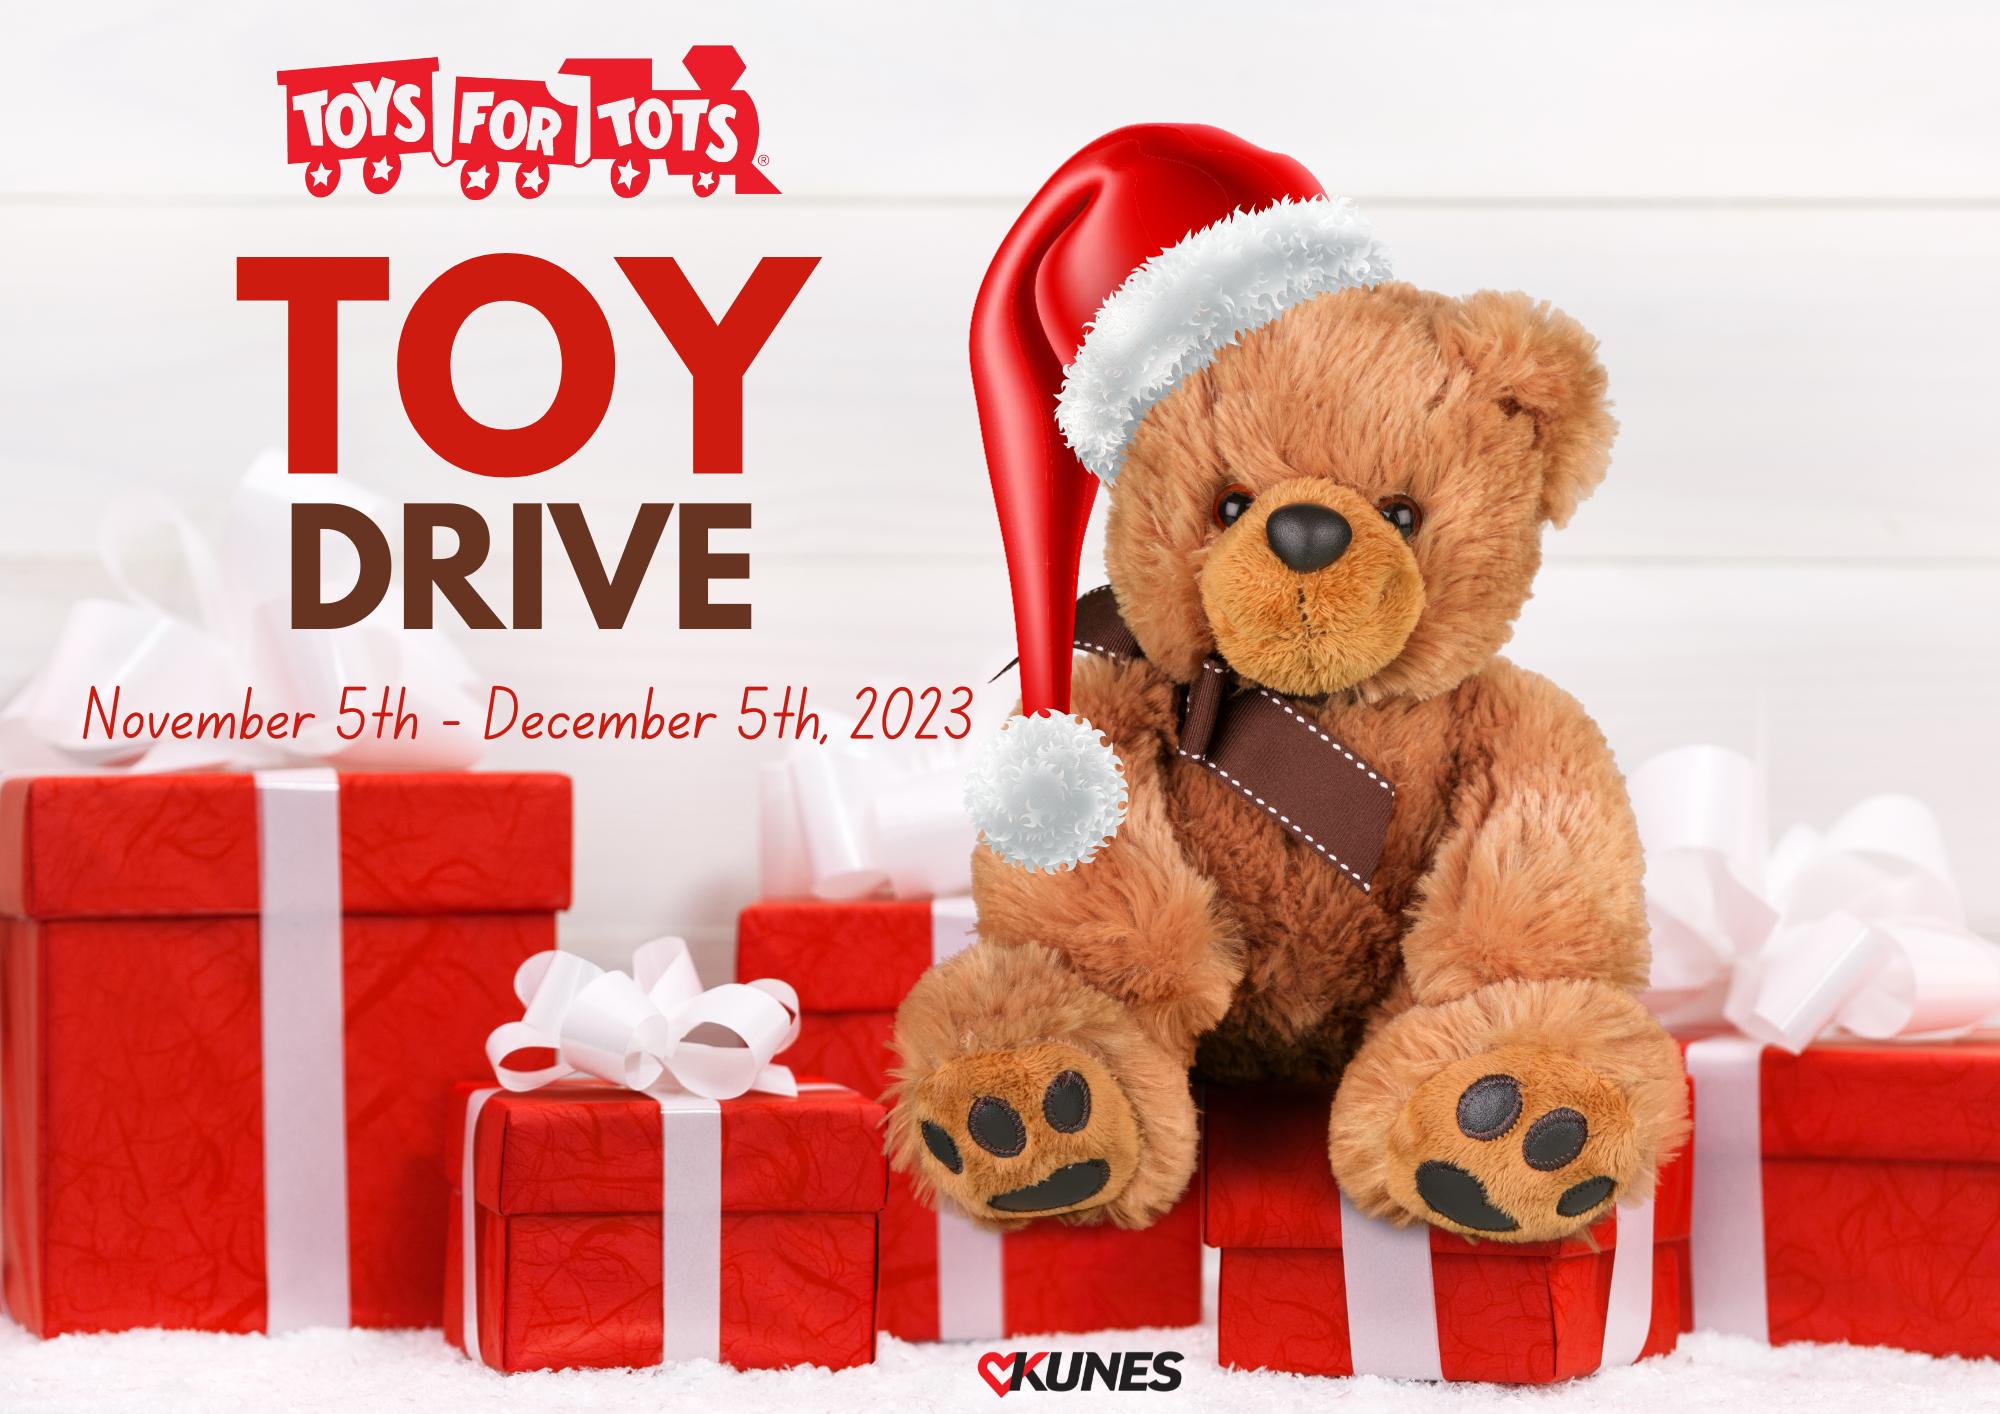 Toys For tots Toy Drive Logo